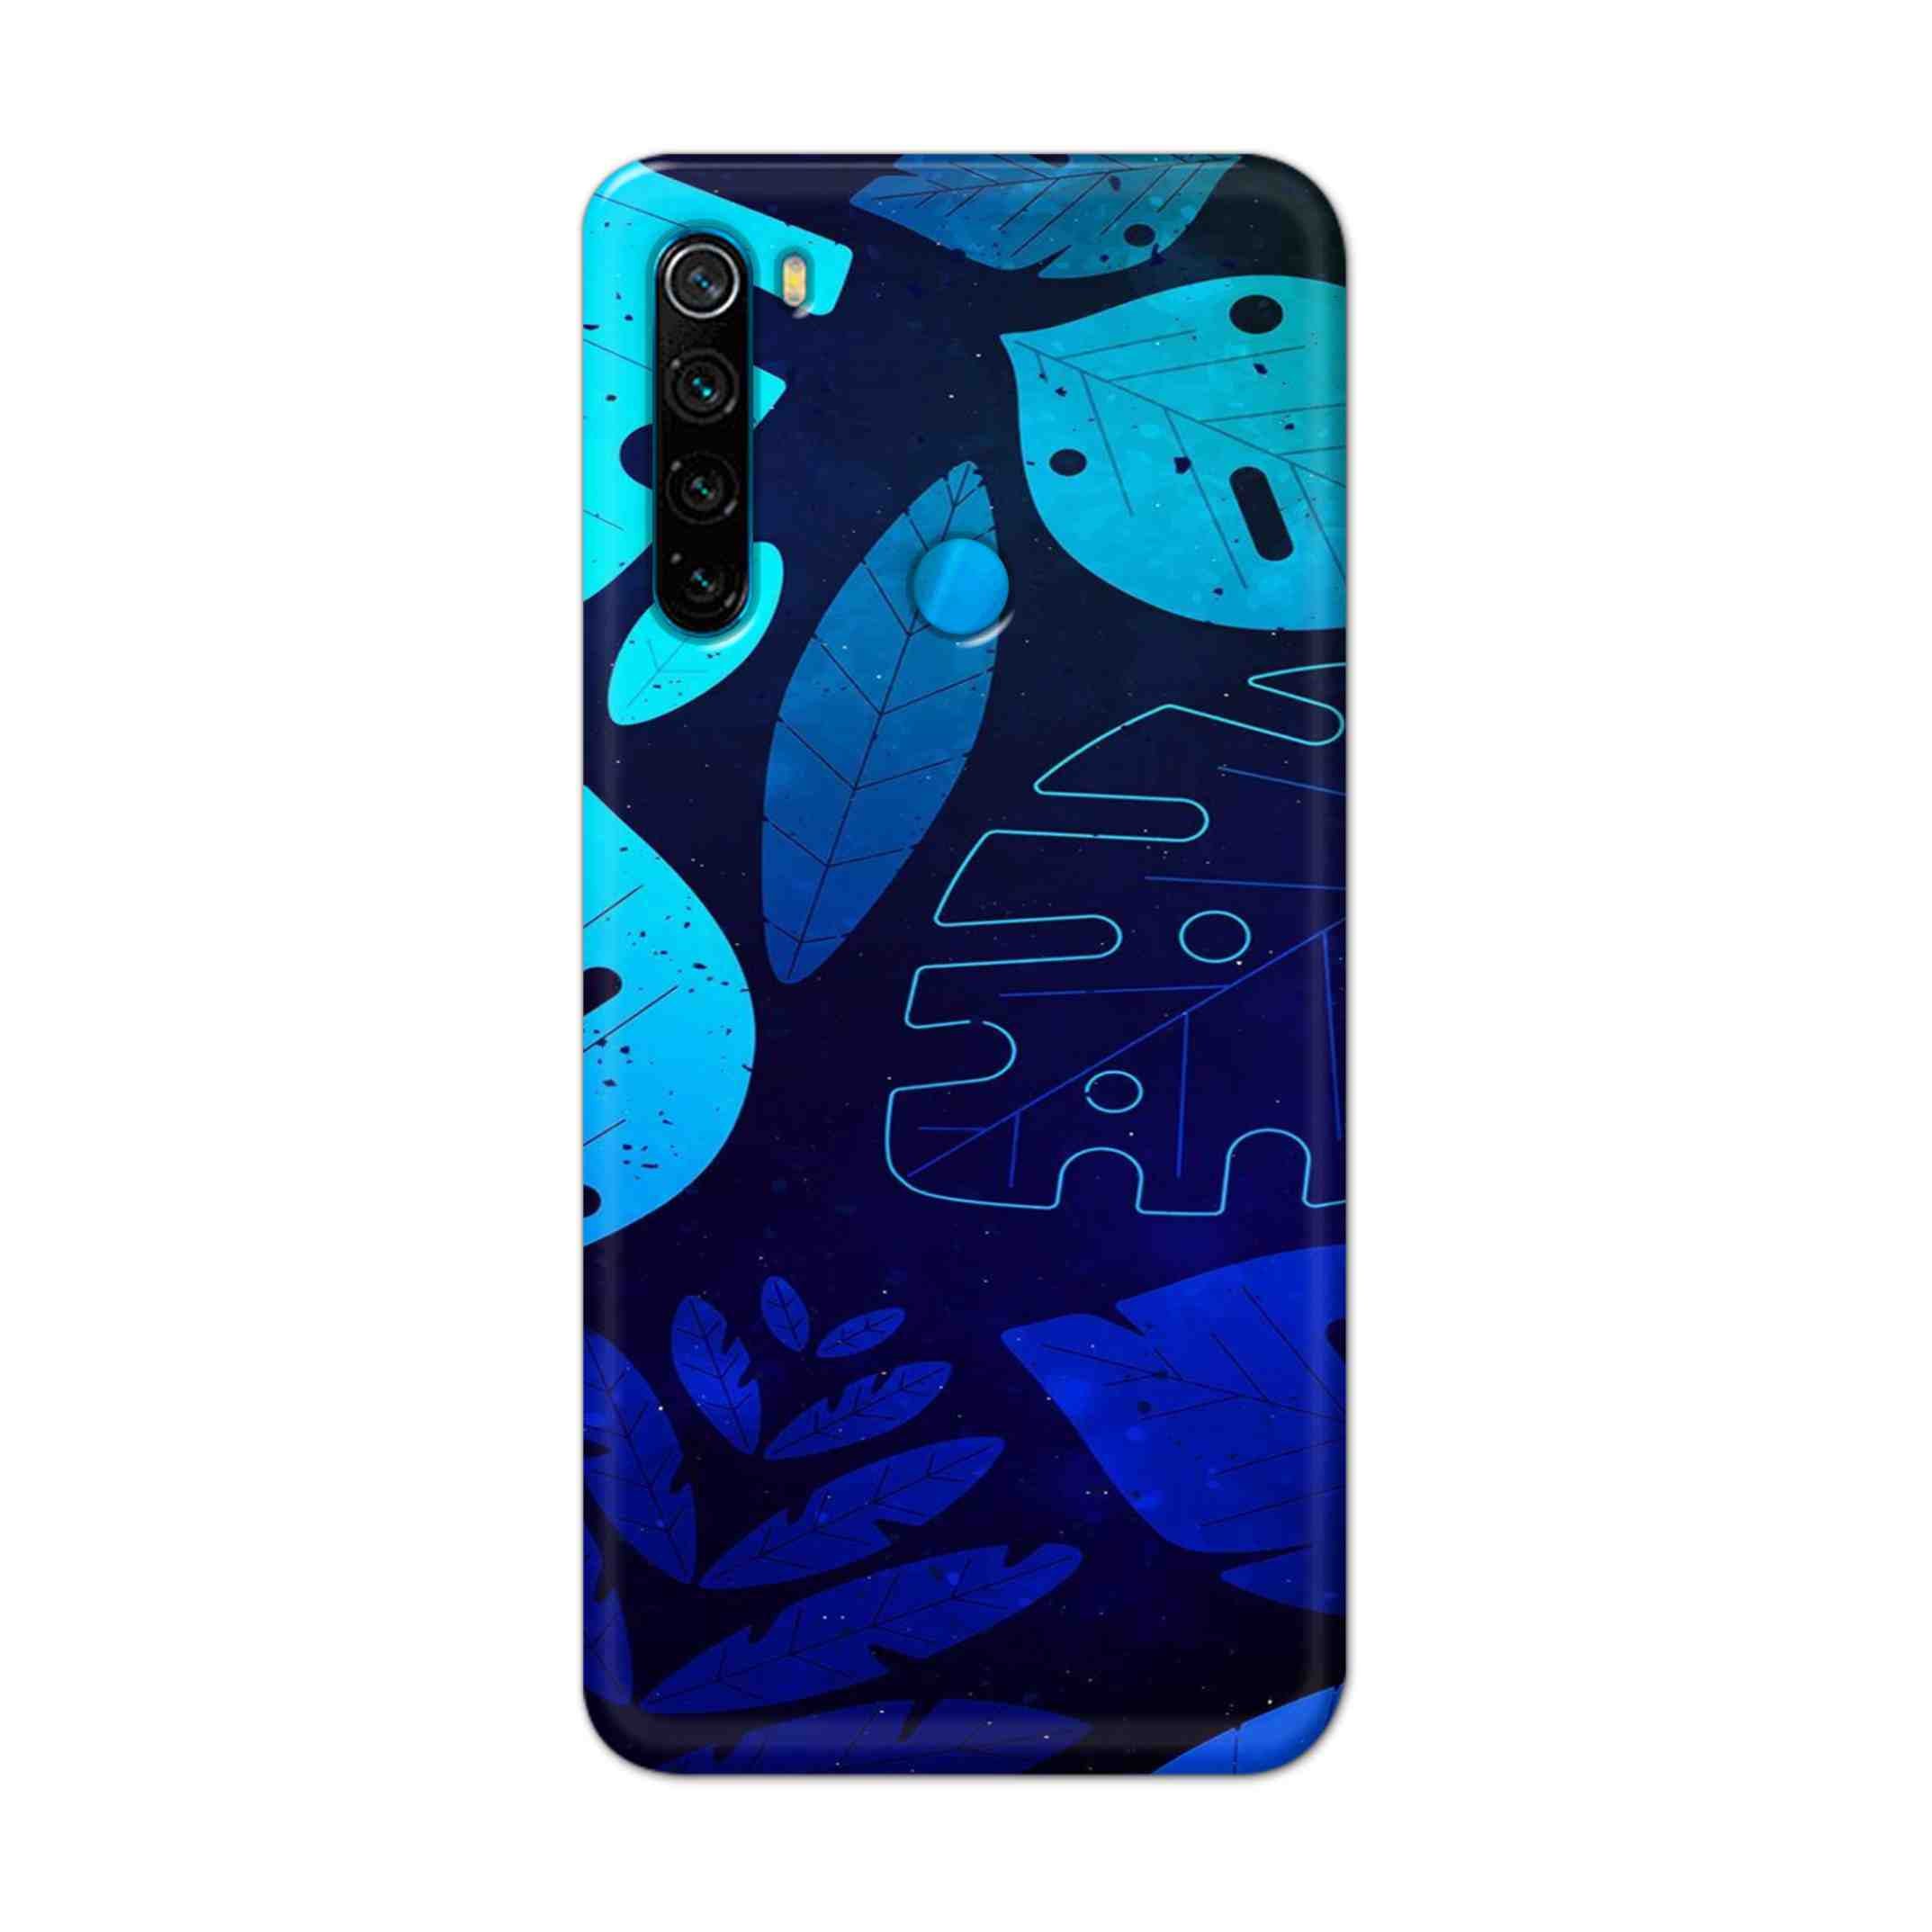 Buy Neon Leaf Hard Back Mobile Phone Case Cover For Xiaomi Redmi Note 8 Online